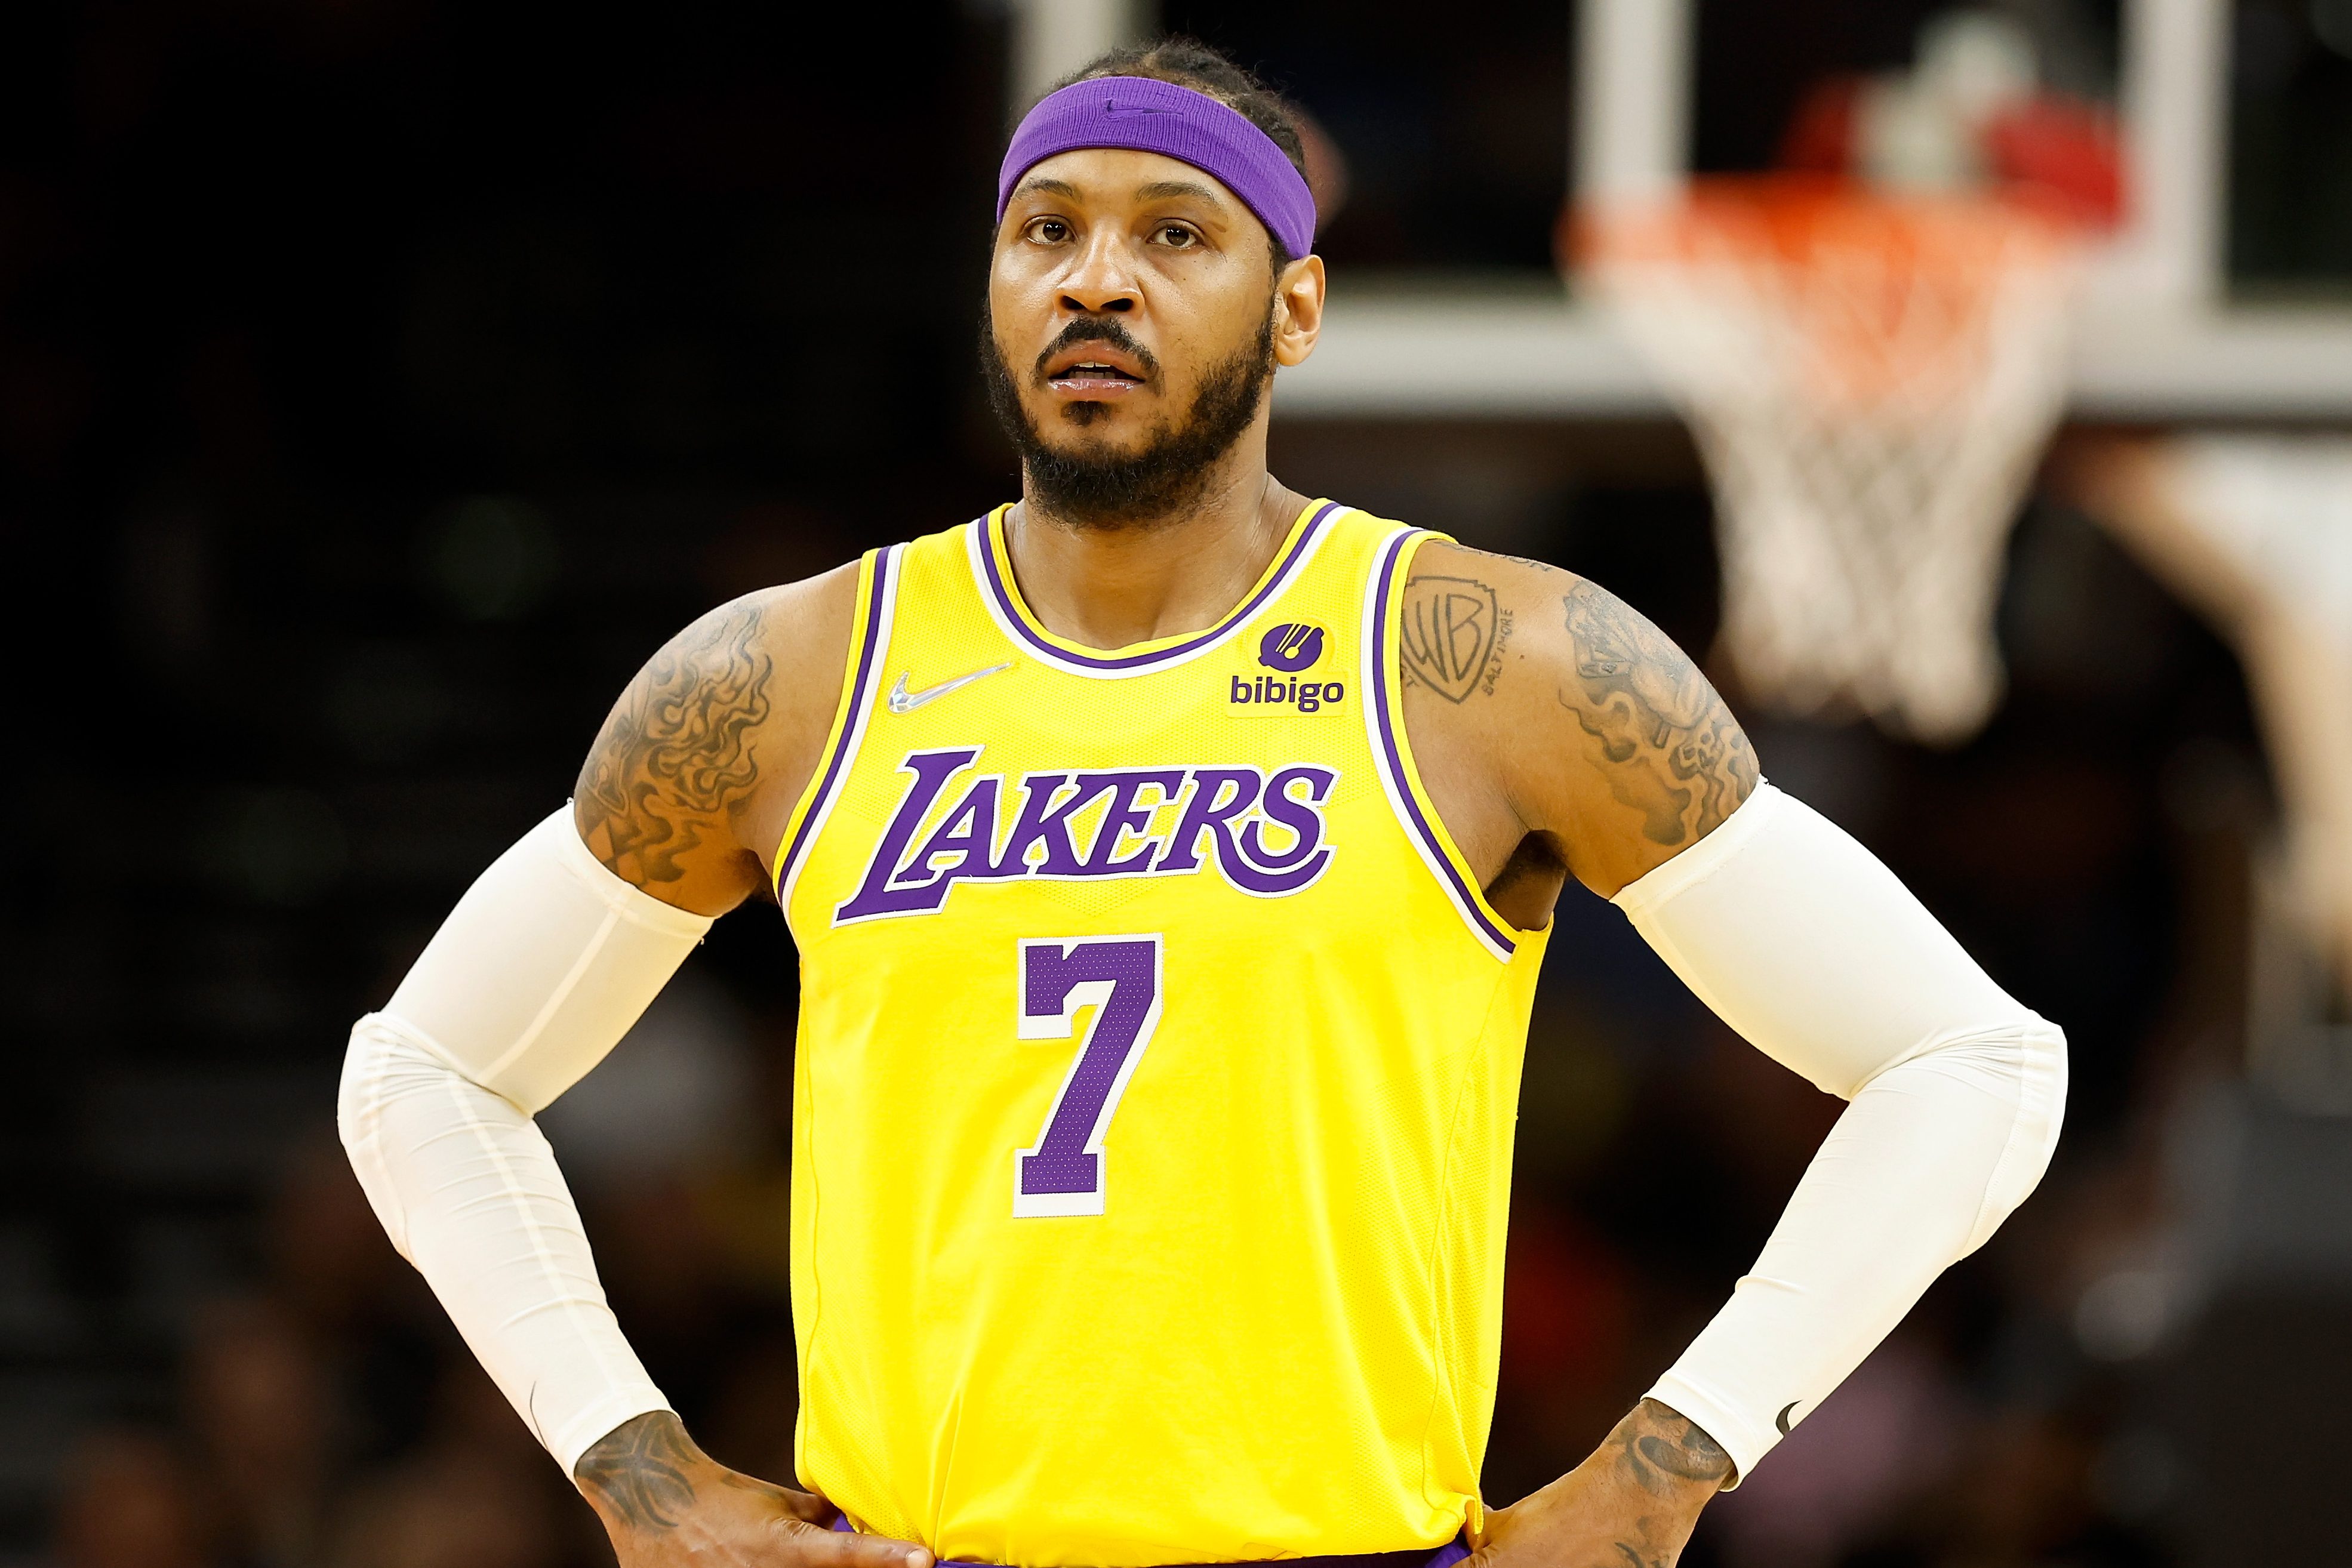 Carmelo Anthony joins his friend LeBron James with title the only goal